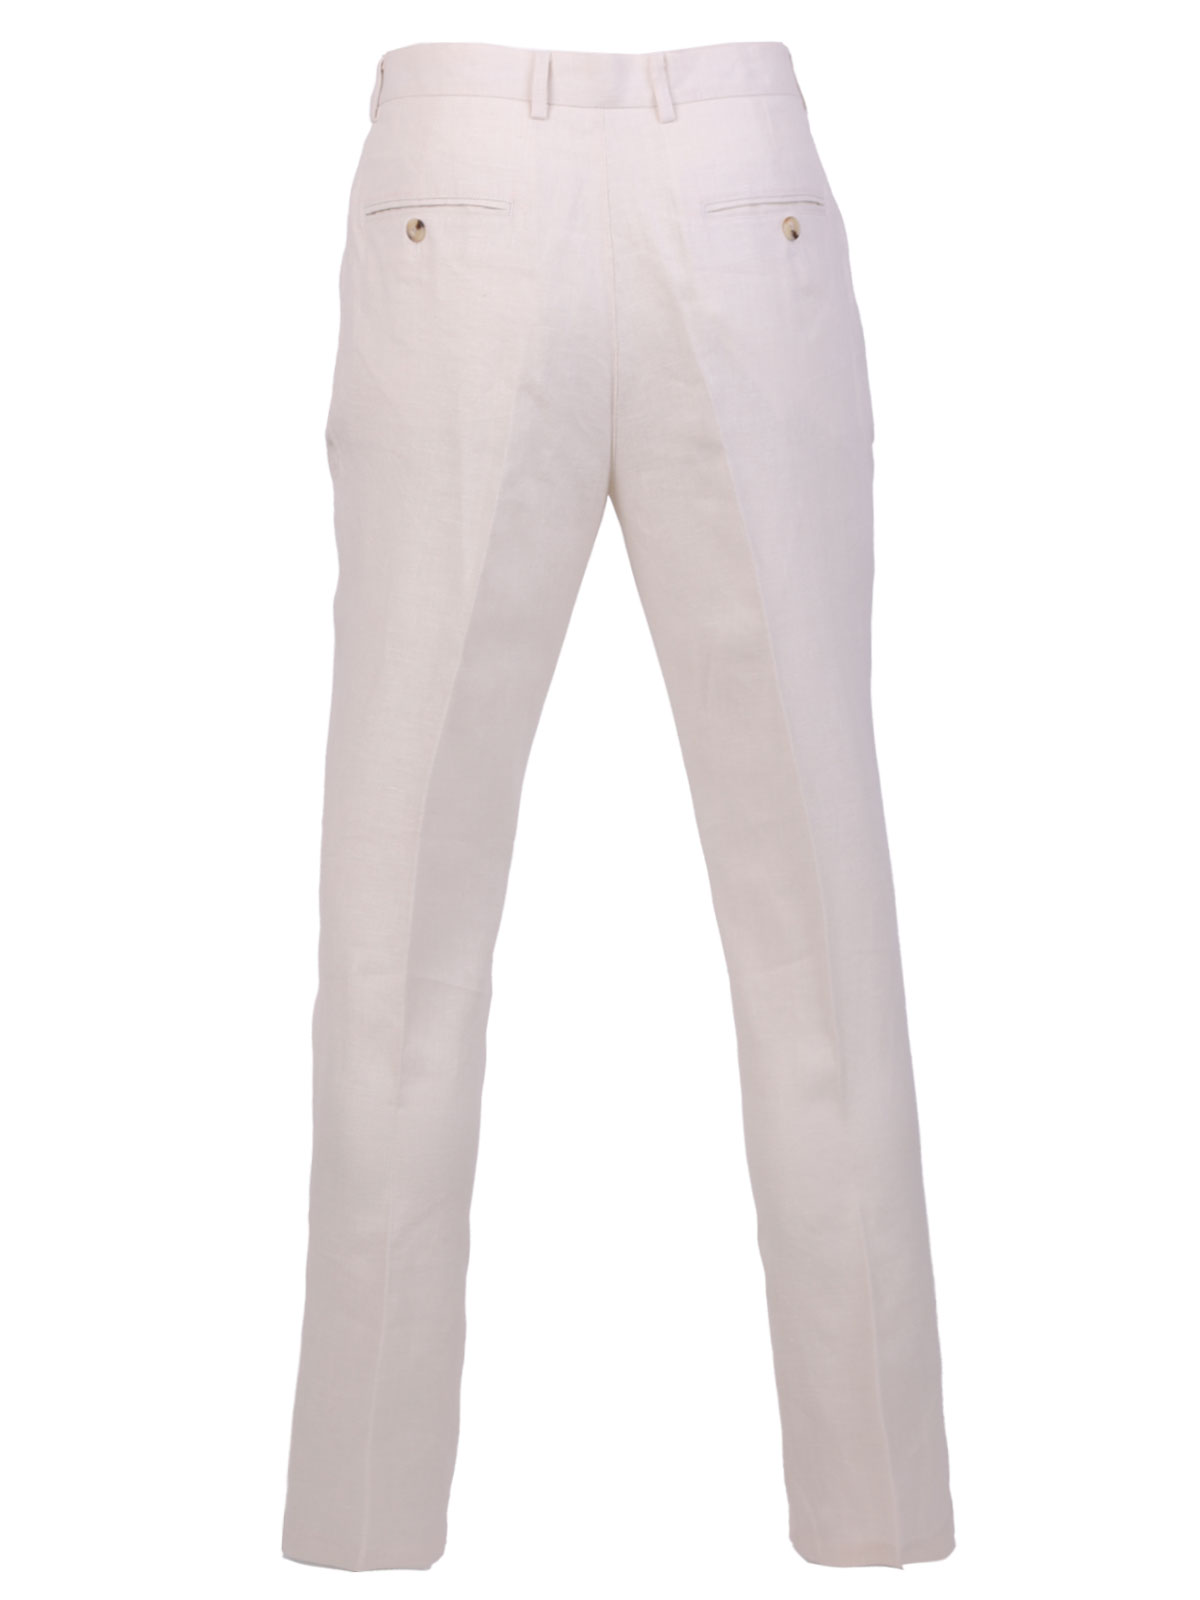 Linen pants in light sand color - 60257 € 65.24 img2